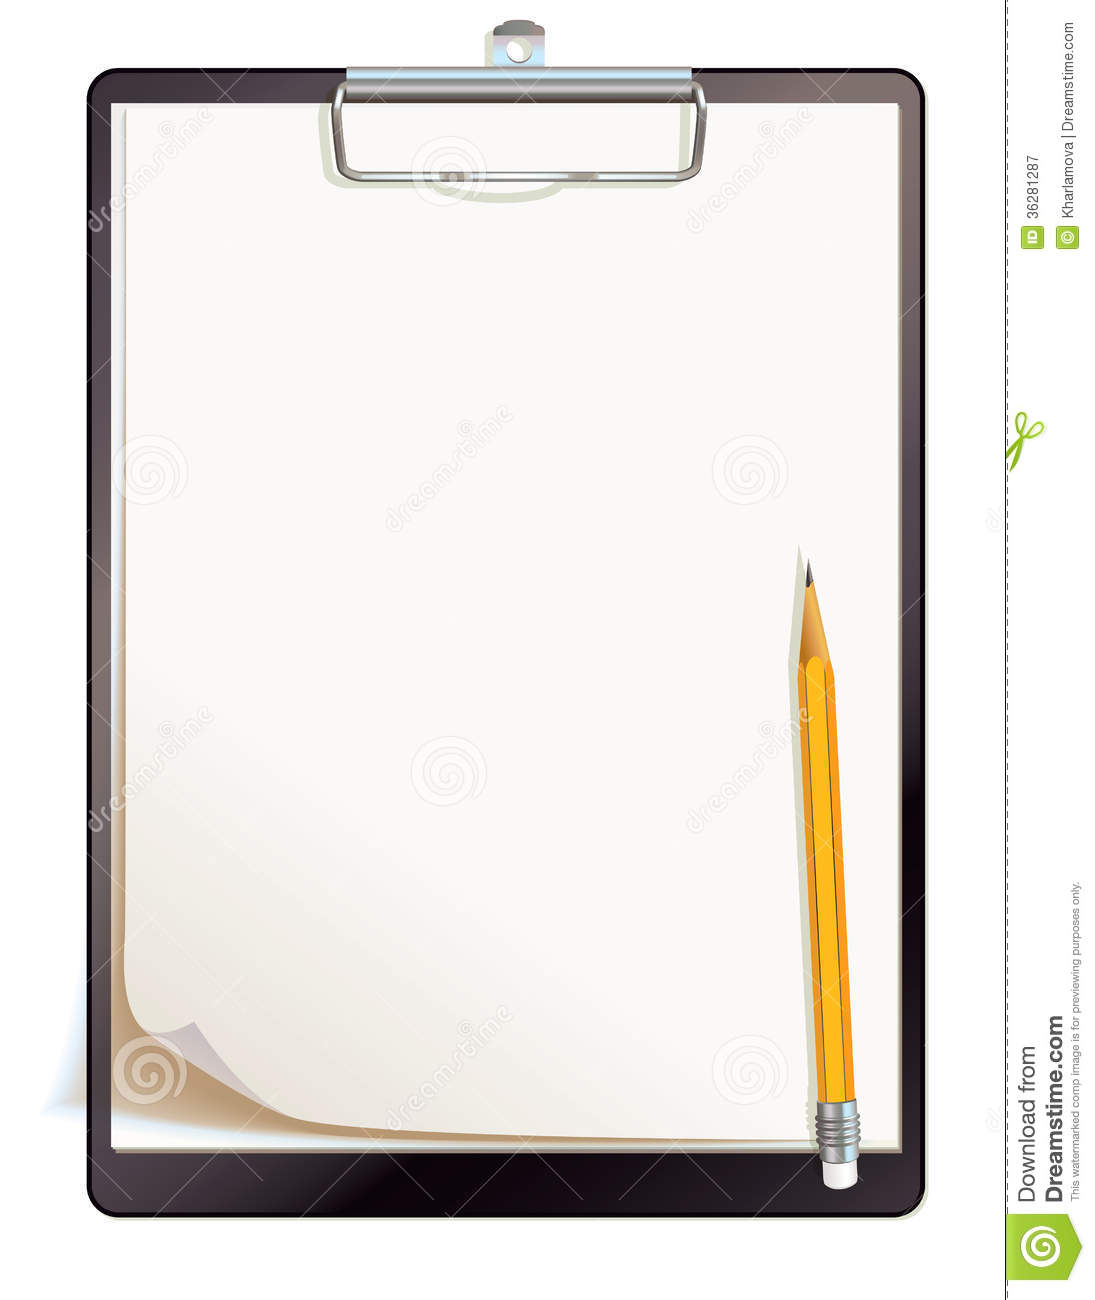 Black Clipboard With Blank Sheets Of Paper Royalty Free Stock